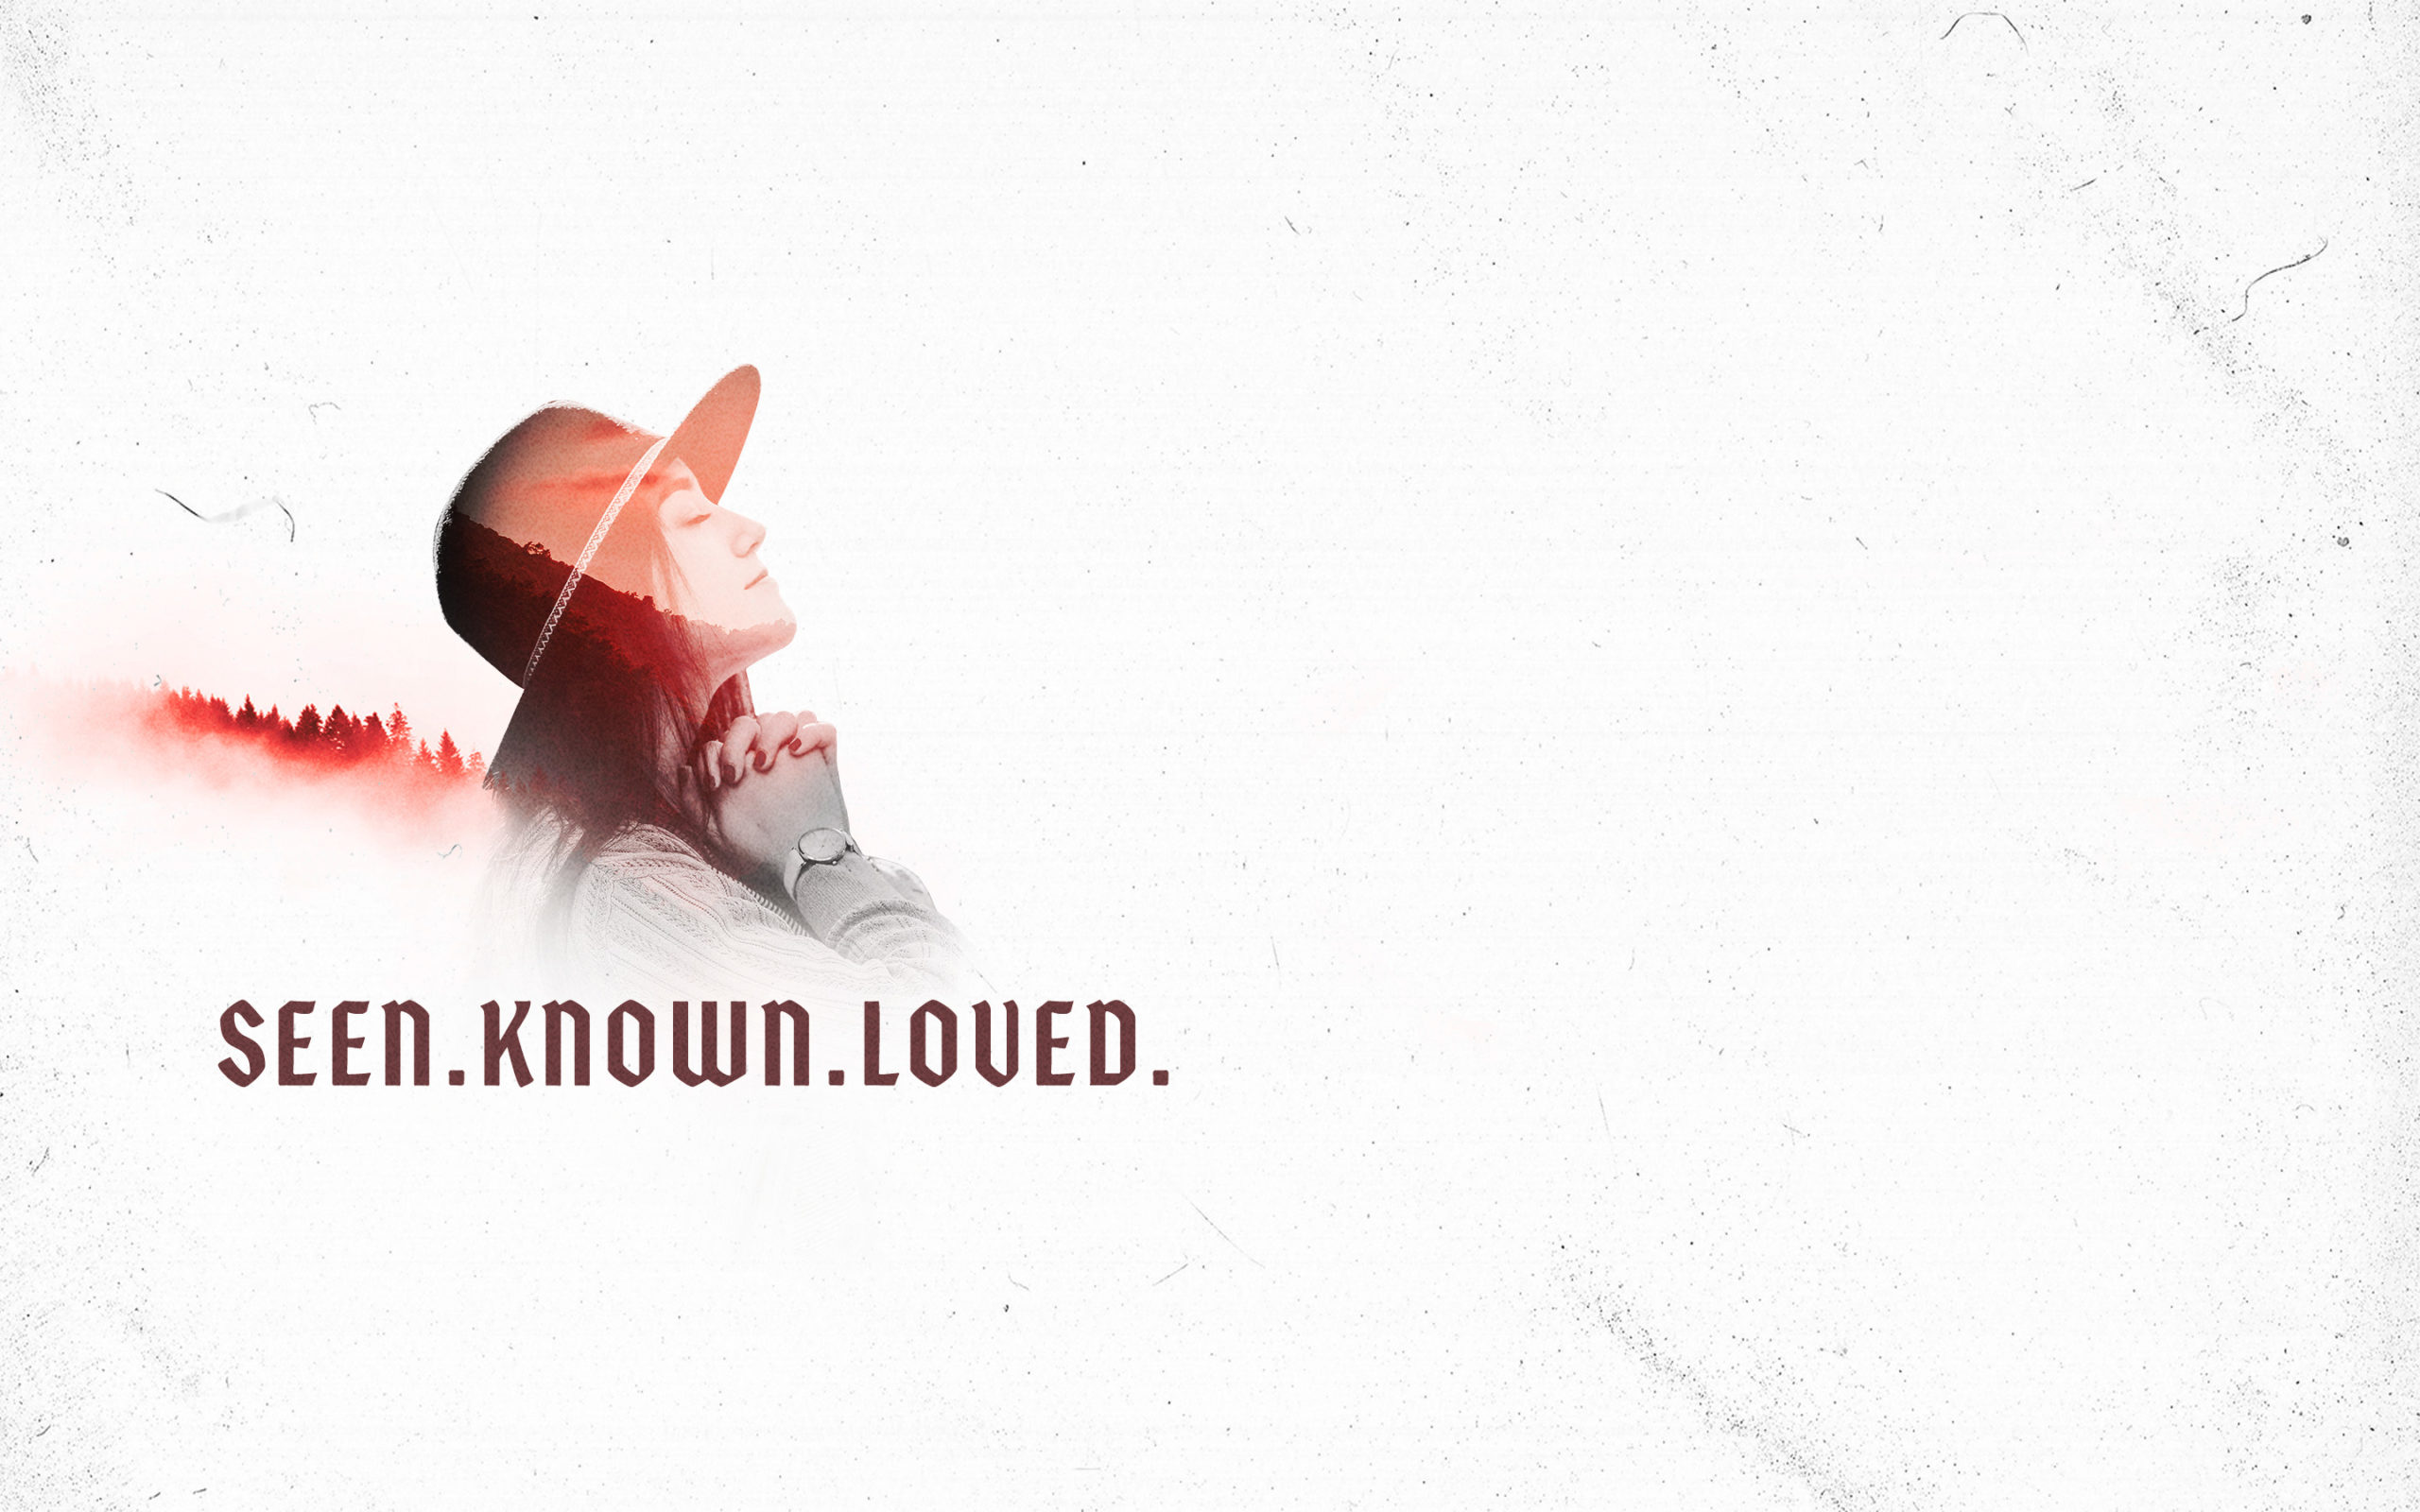 Image: Seen. Known. Loved.